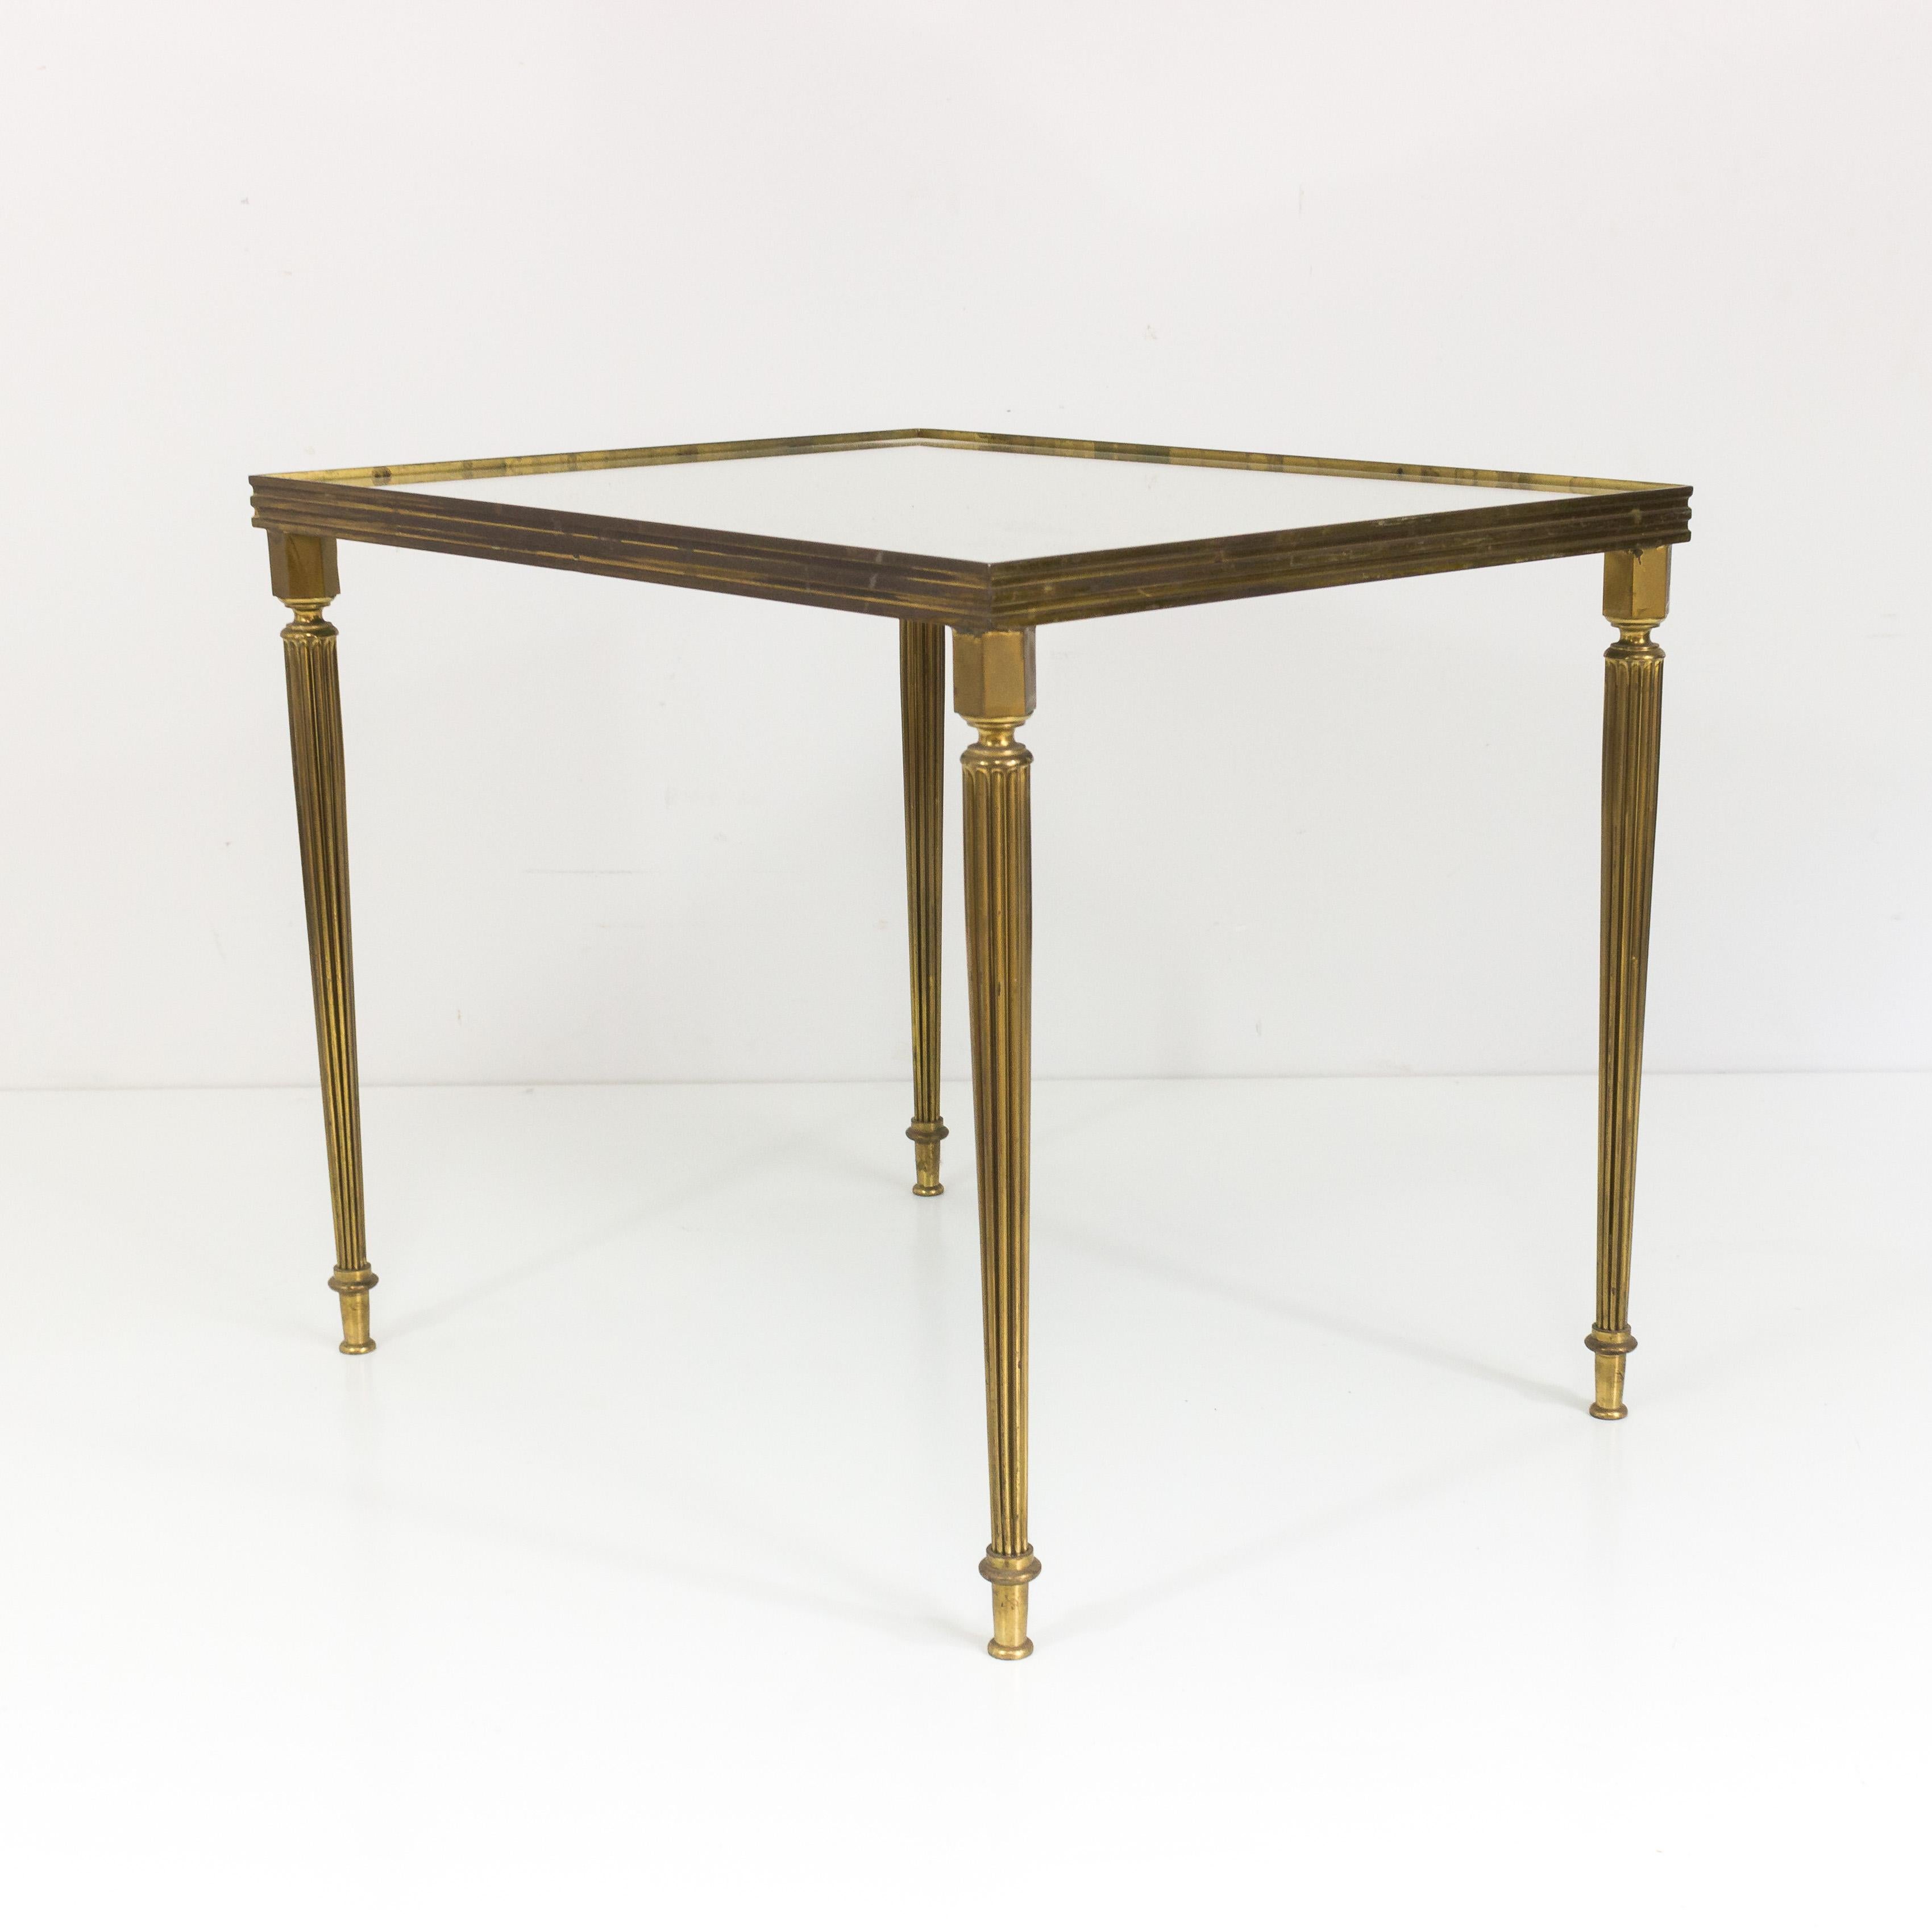 Set of three nesting tables with fluted brass legs and brass frames and mirrored tops, French, 1940s.

This item is currently in France, please allow 2 to 4 weeks delivery to New York. Shipping costs from France to our warehouse in New York